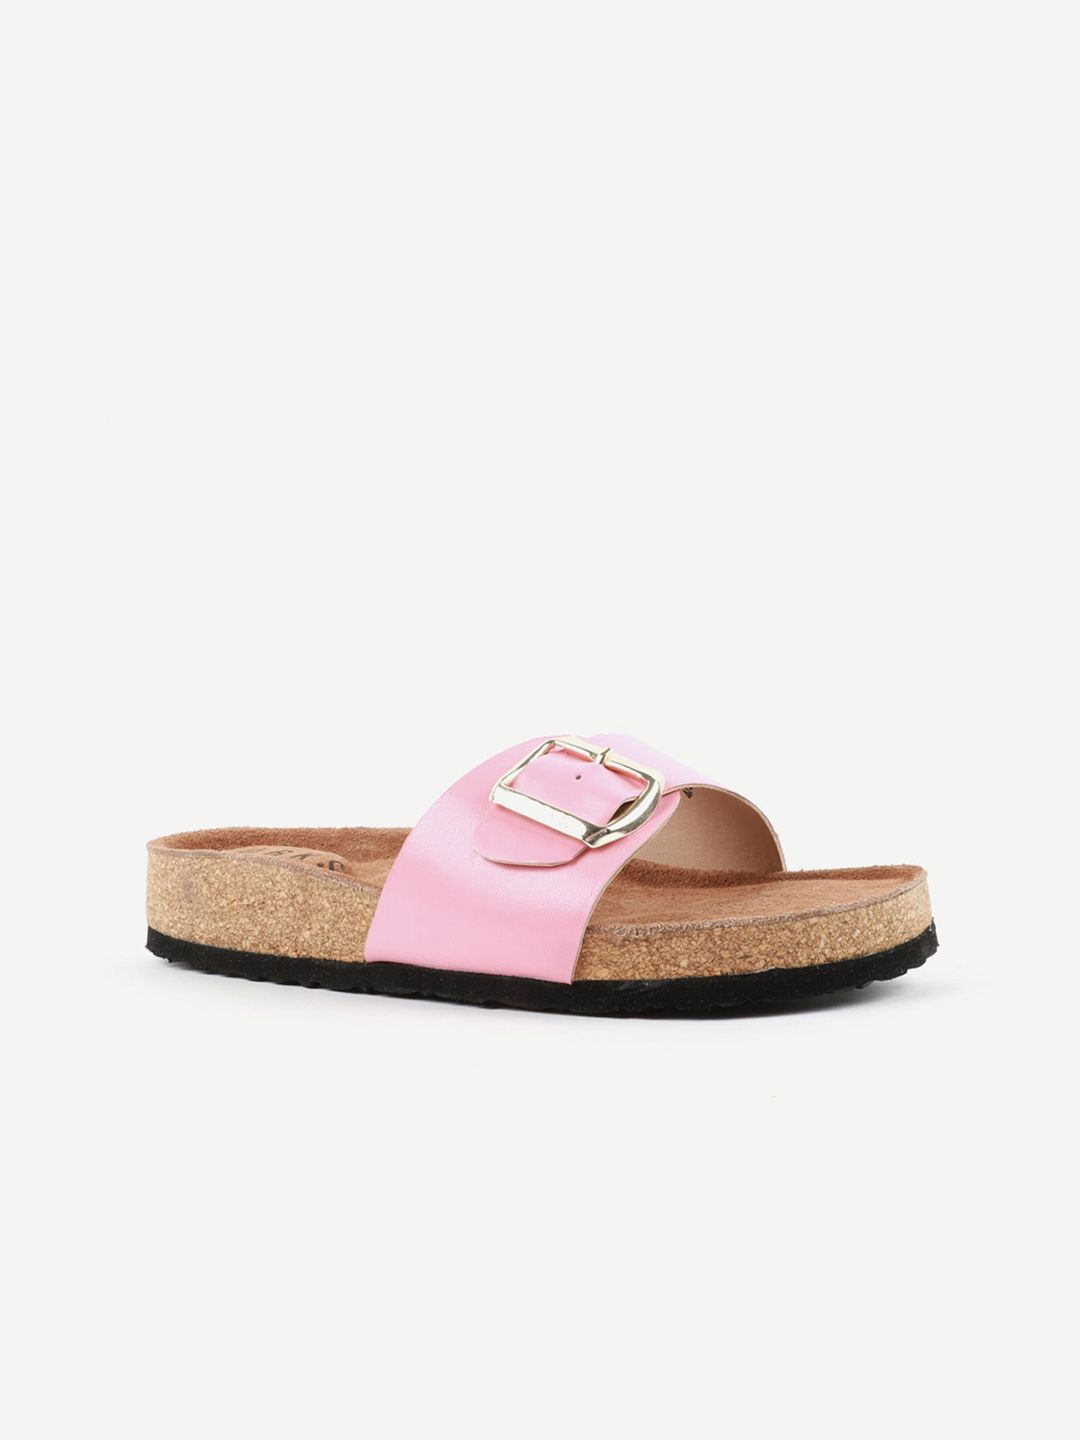 Carlton London Women Pink Open Toe Flats with Buckles Price in India